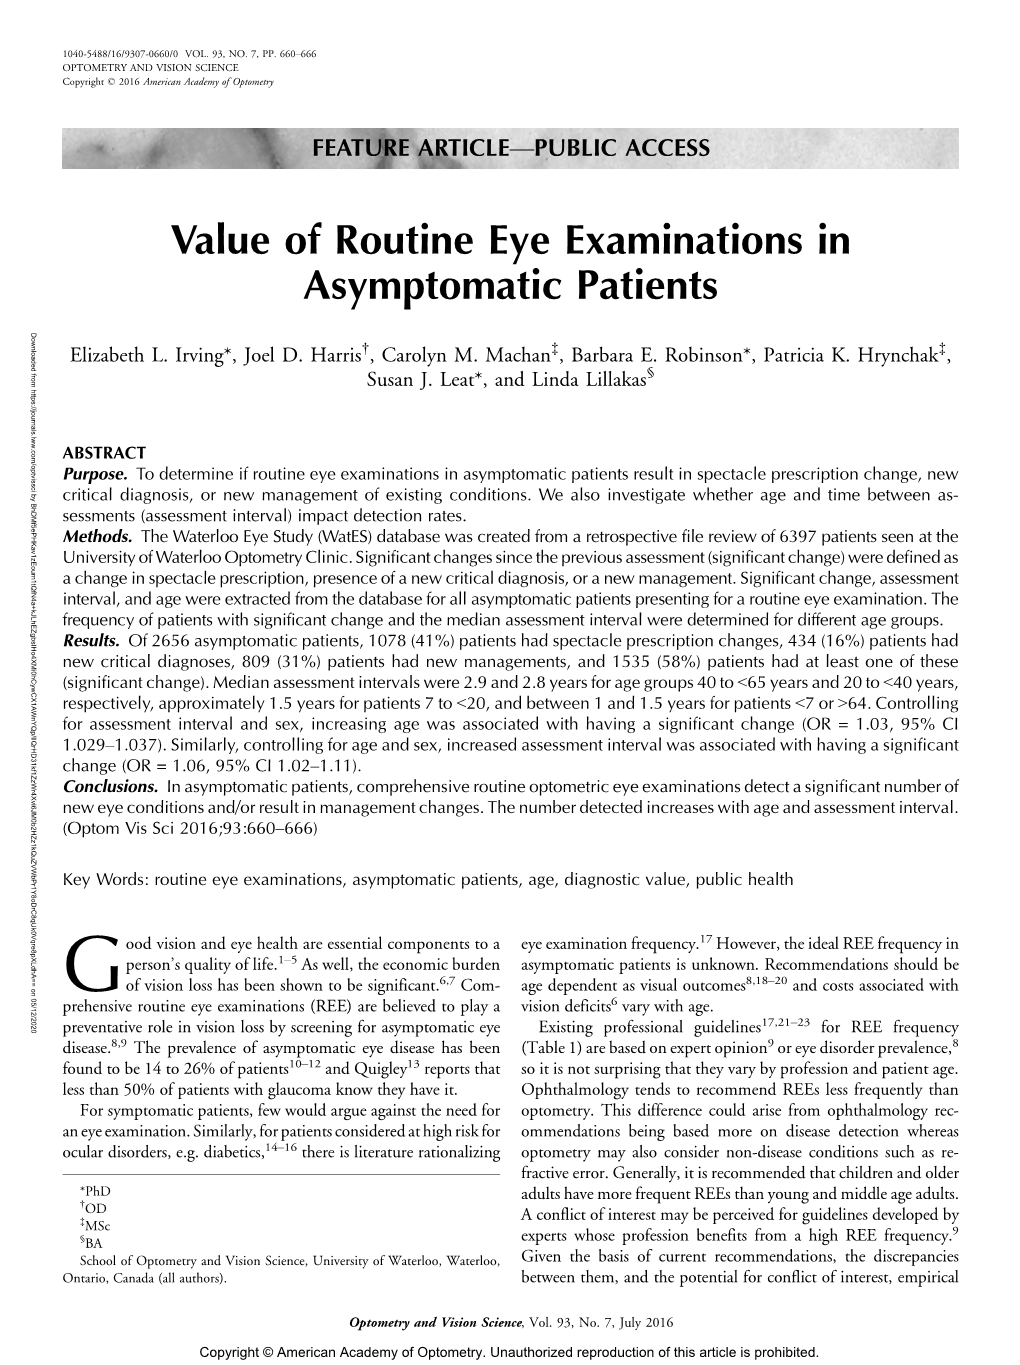 Value of Routine Eye Examinations in Asymptomatic Patients